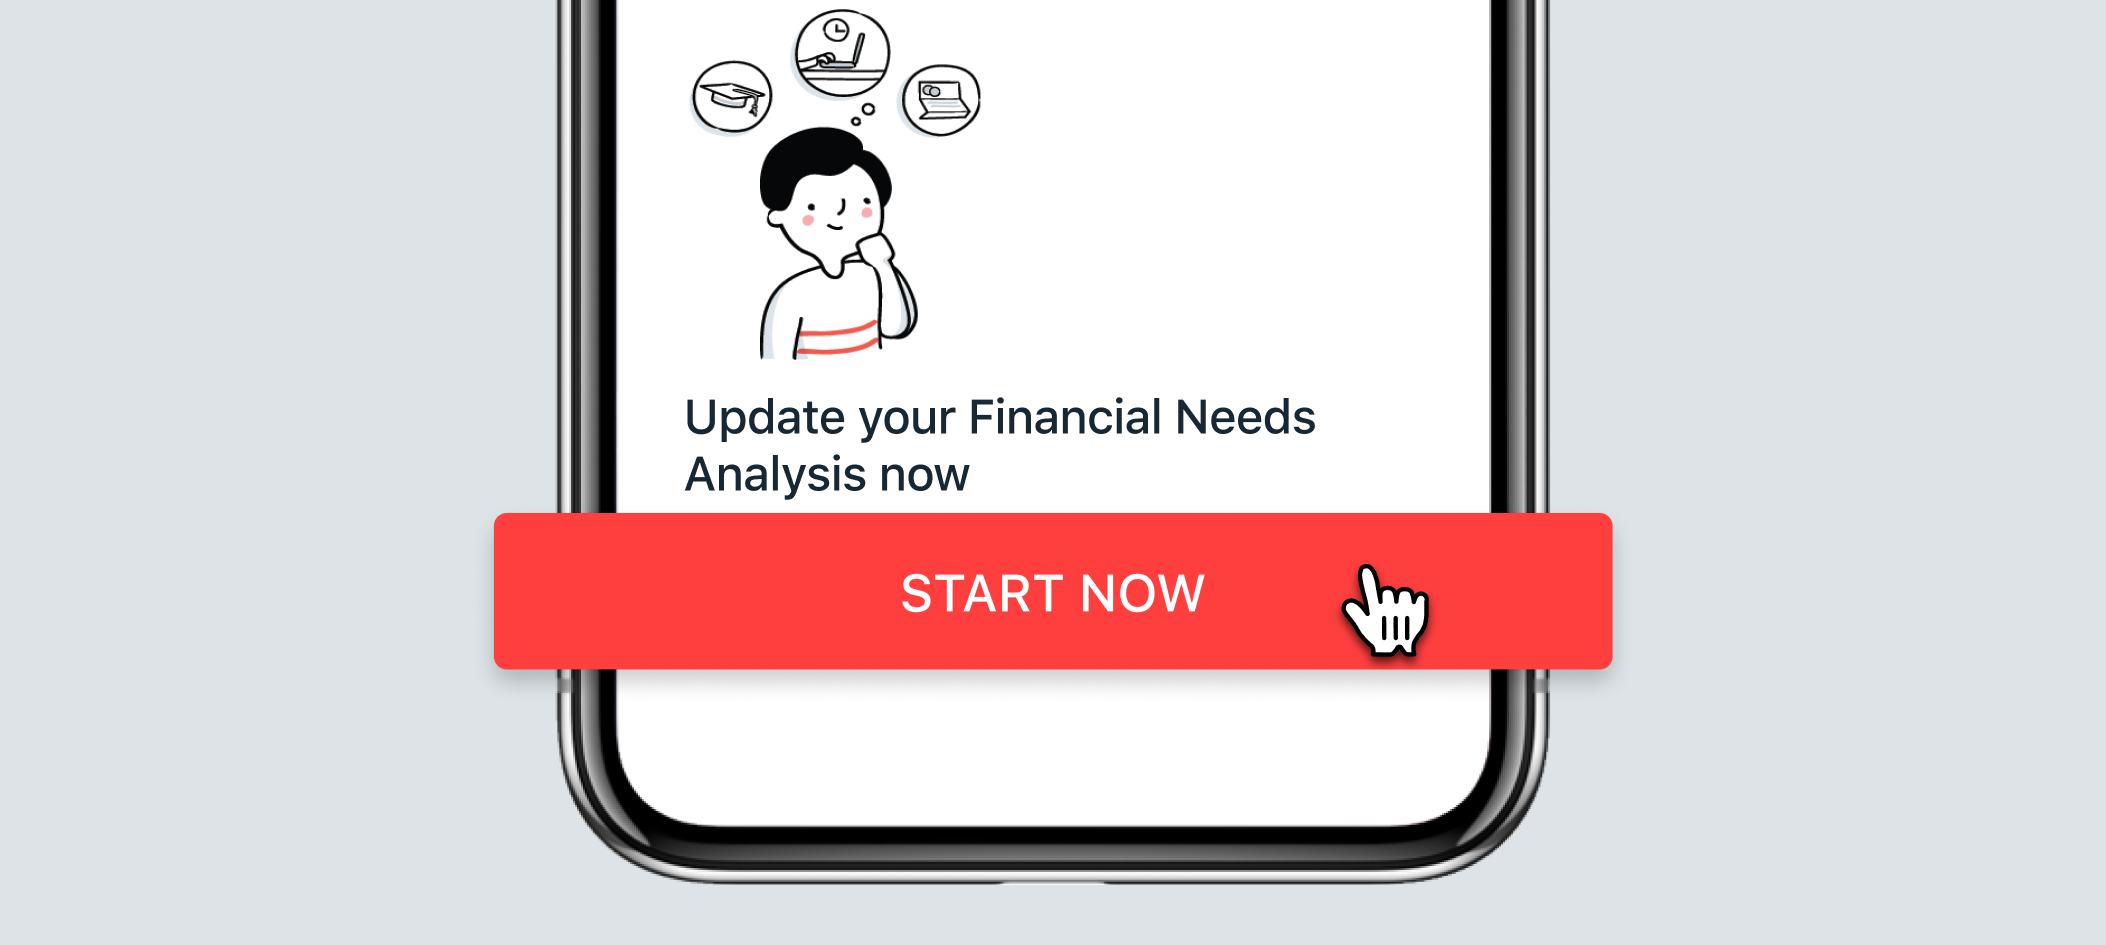 Tap START NOW to start your Financial Needs Analysis